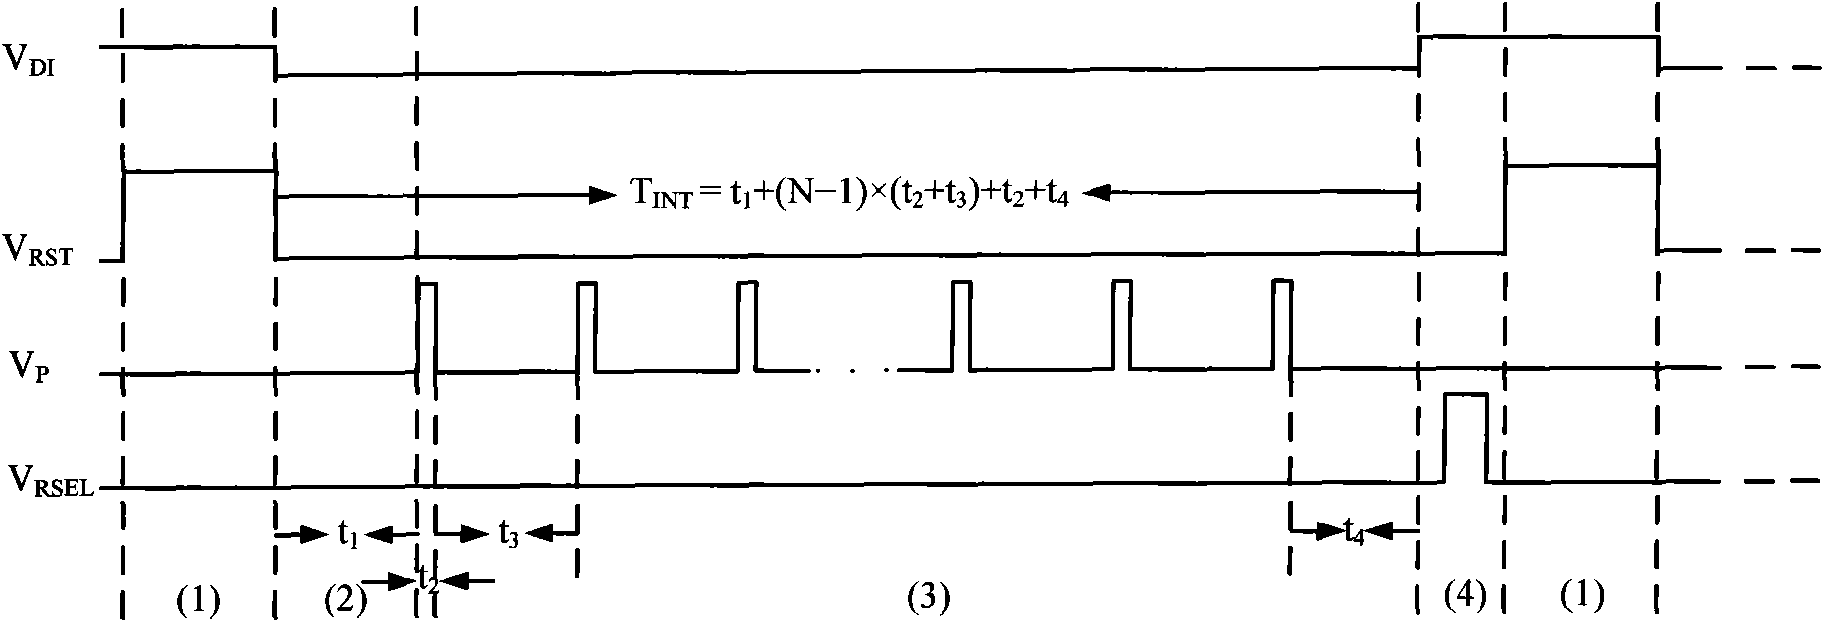 Stage background inhibiting infrared focal plane unit circuit